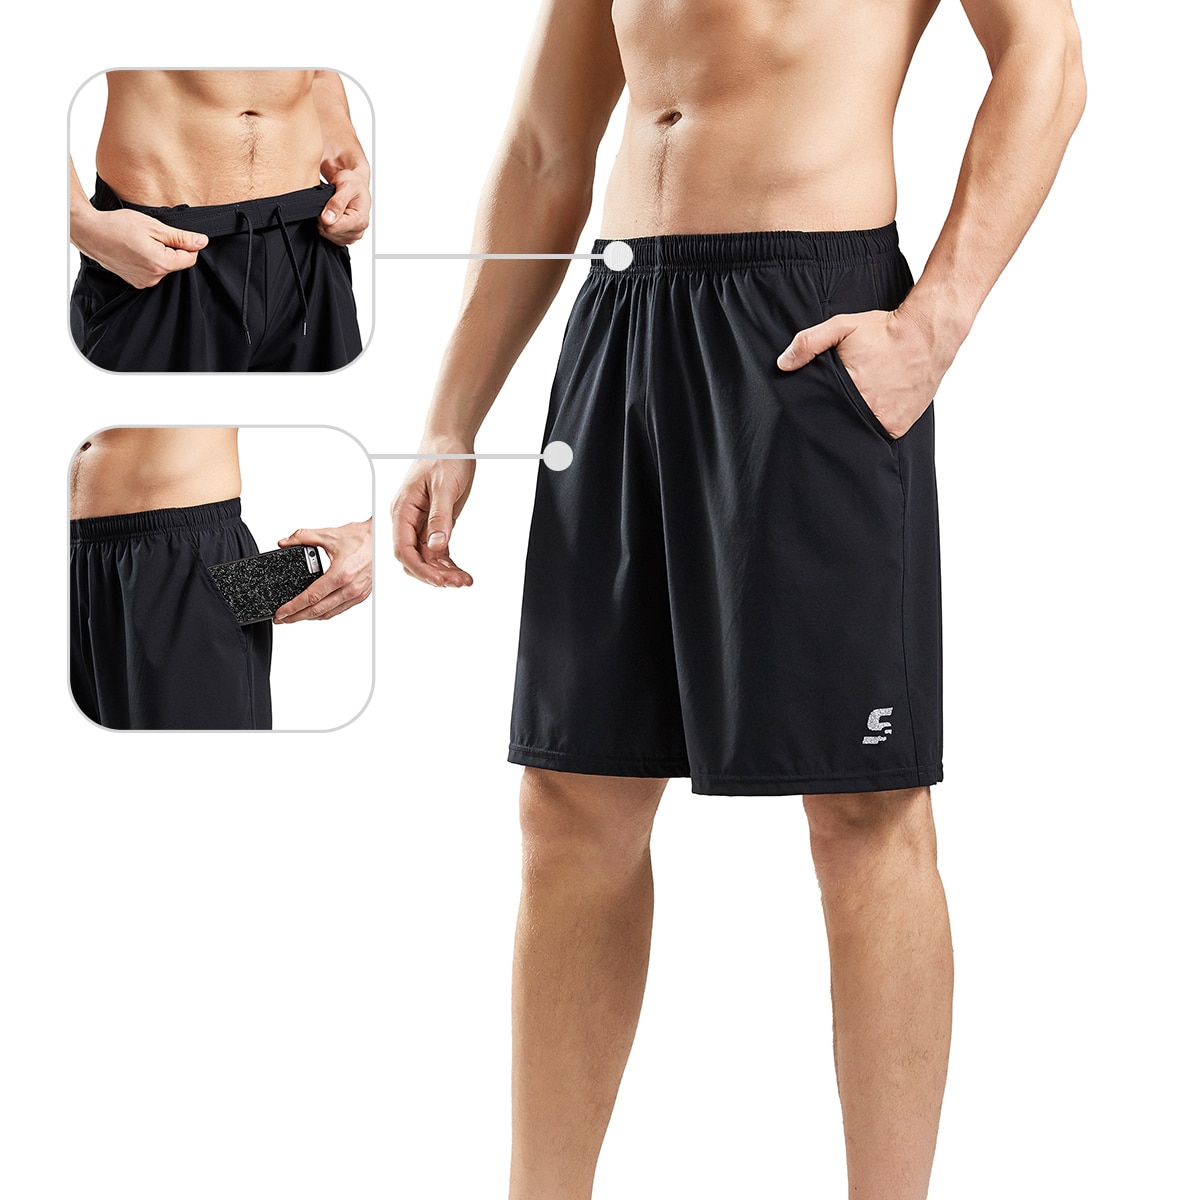 Men's Workout Shorts with Pockets